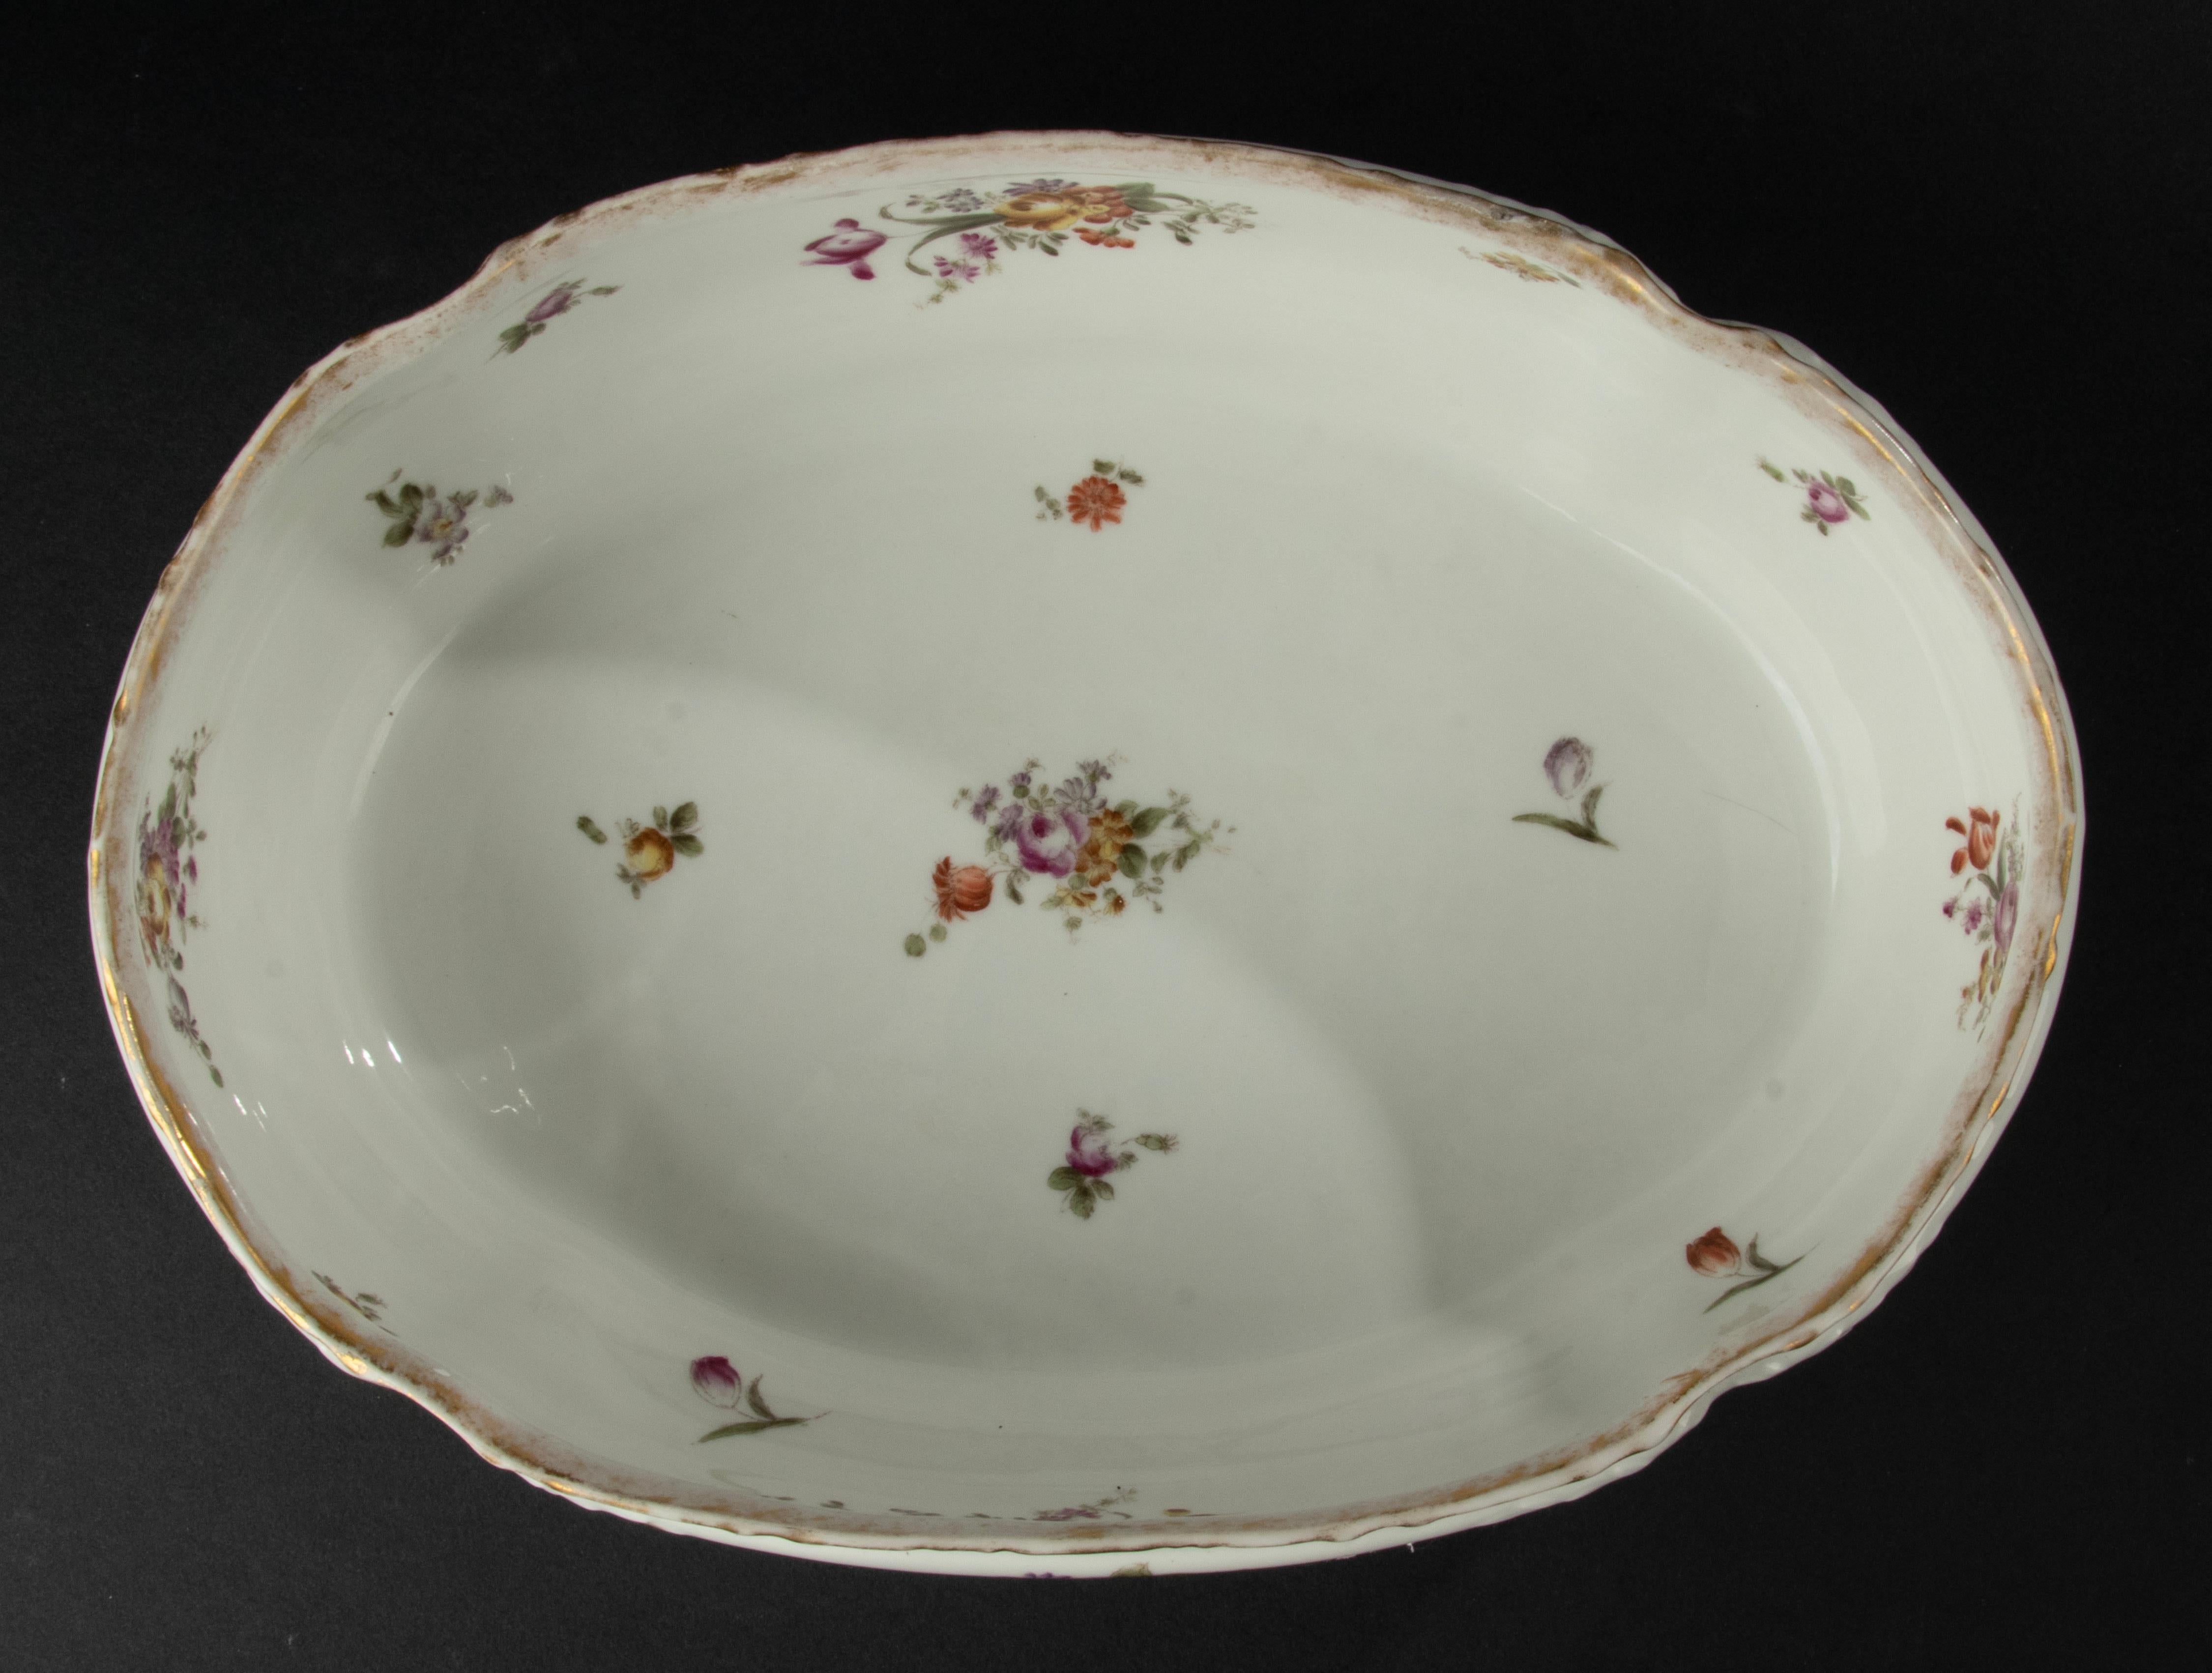 Early 20th Century Porcelain Jardinière Made by Limoges, France For Sale 4